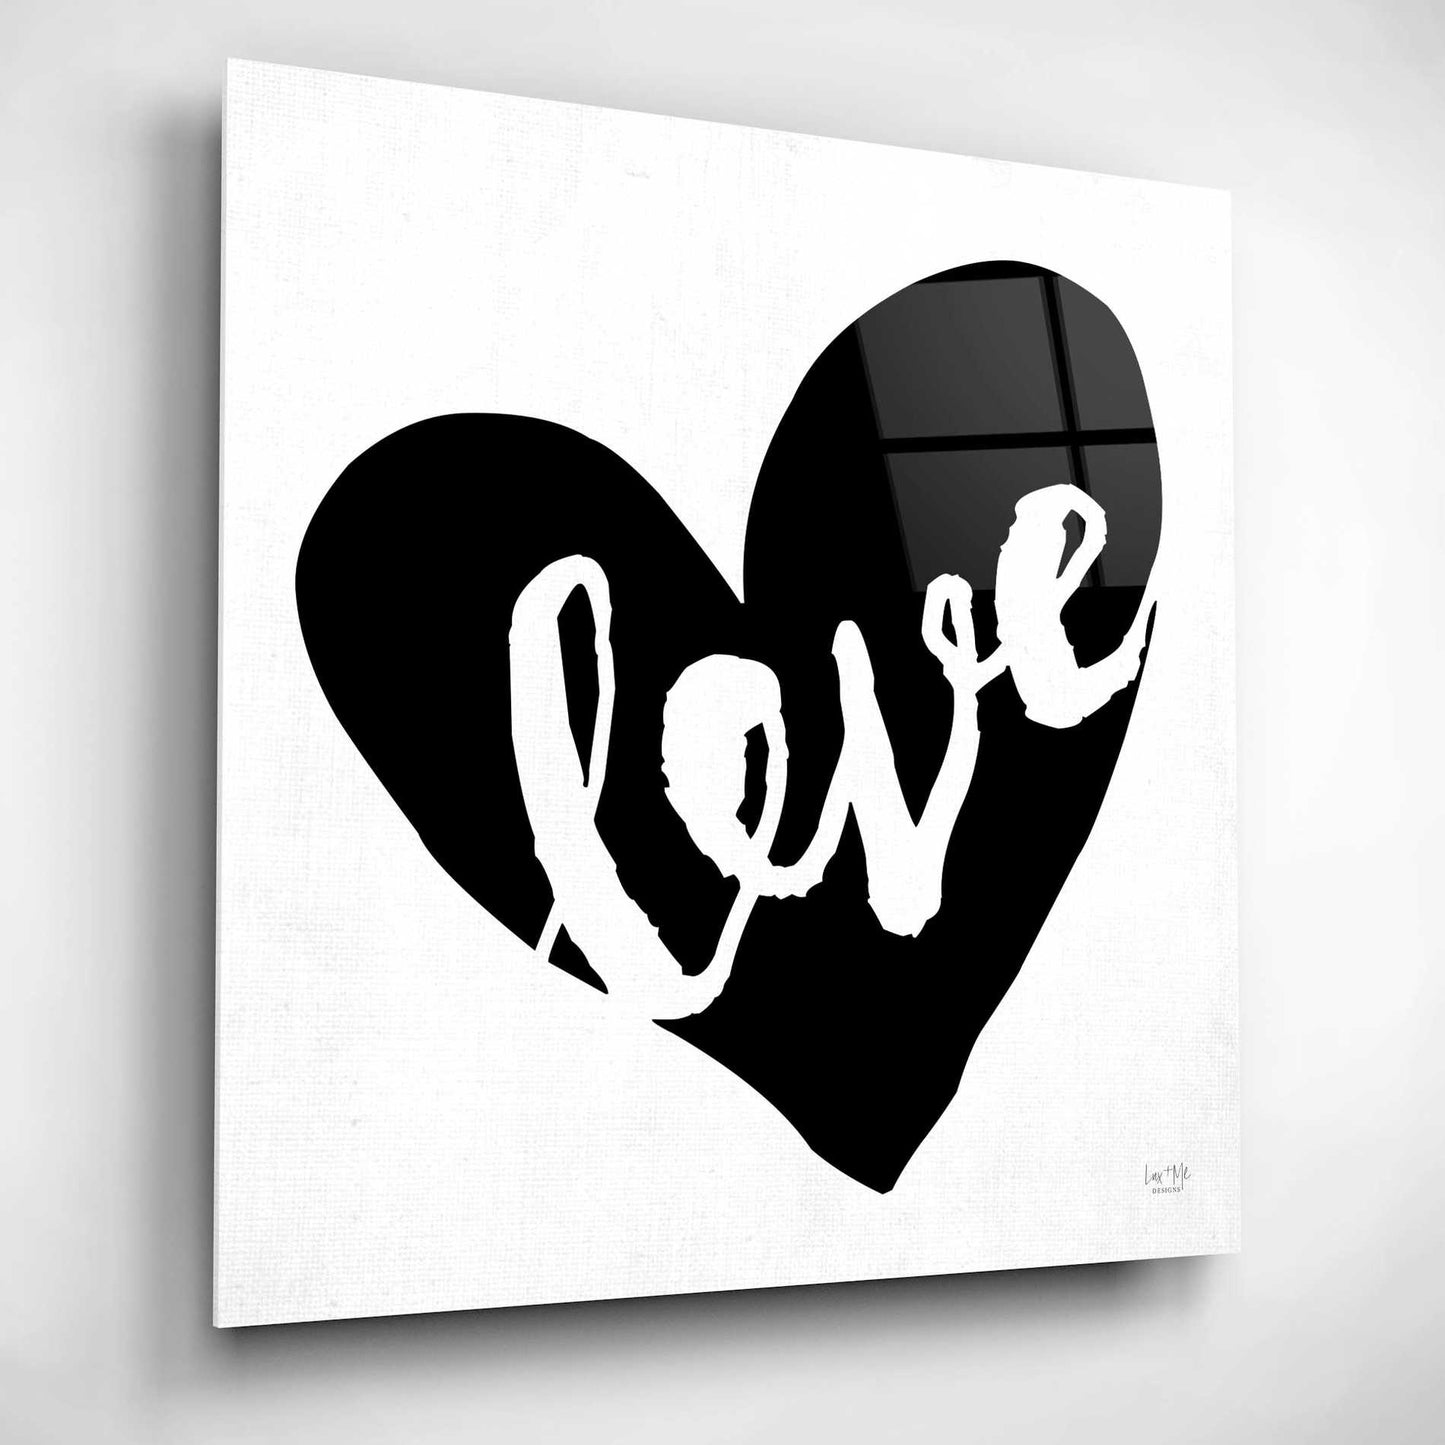 Epic Art 'Love' by Lux + Me Designs, Acrylic Glass Wall Art,12x12